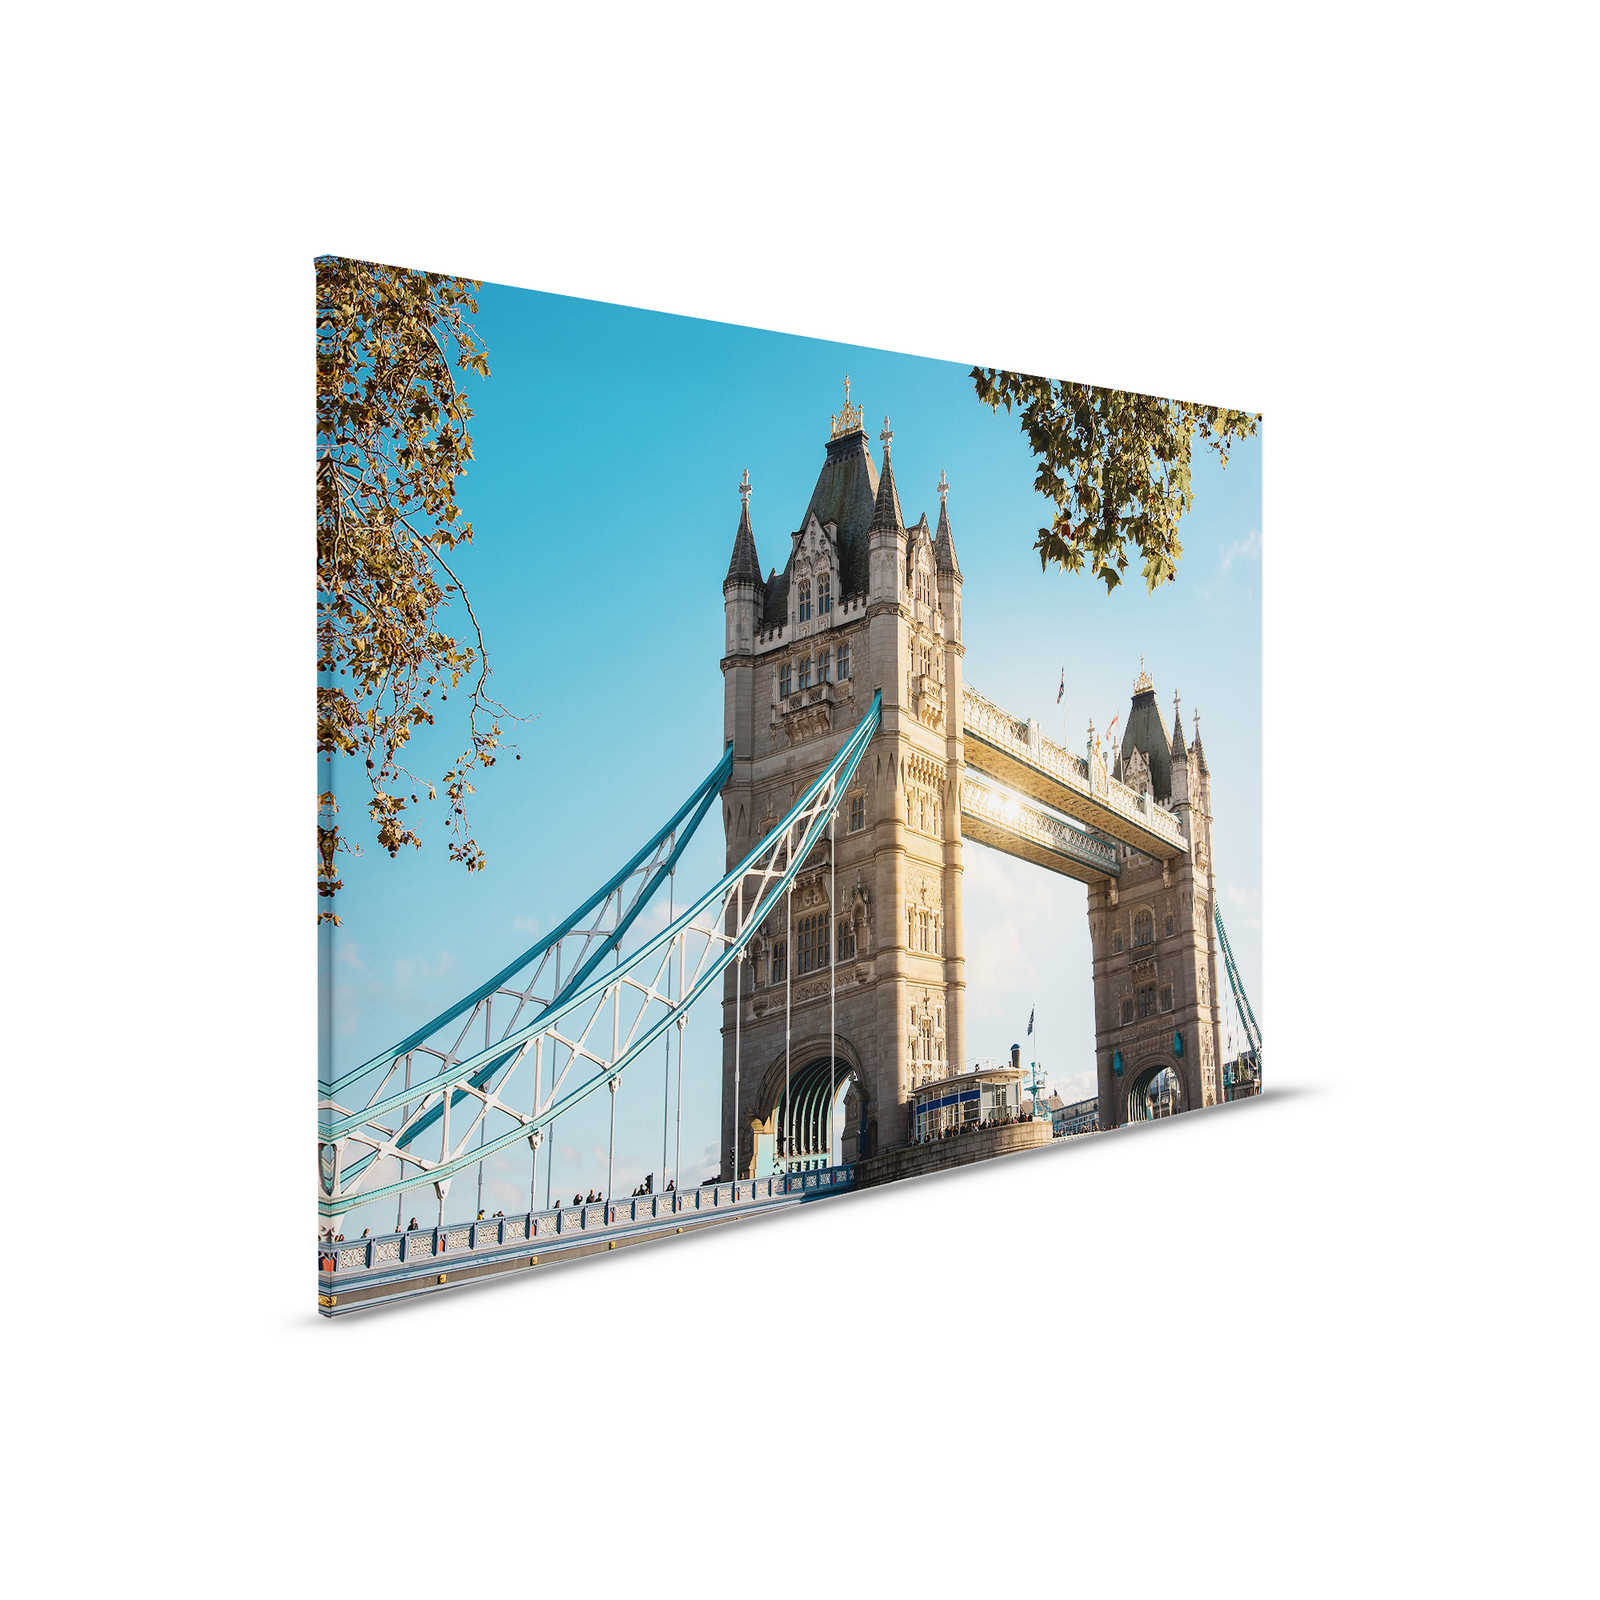         Canvas painting with London Bridge in sunny weather - 0.90 m x 0.60 m
    